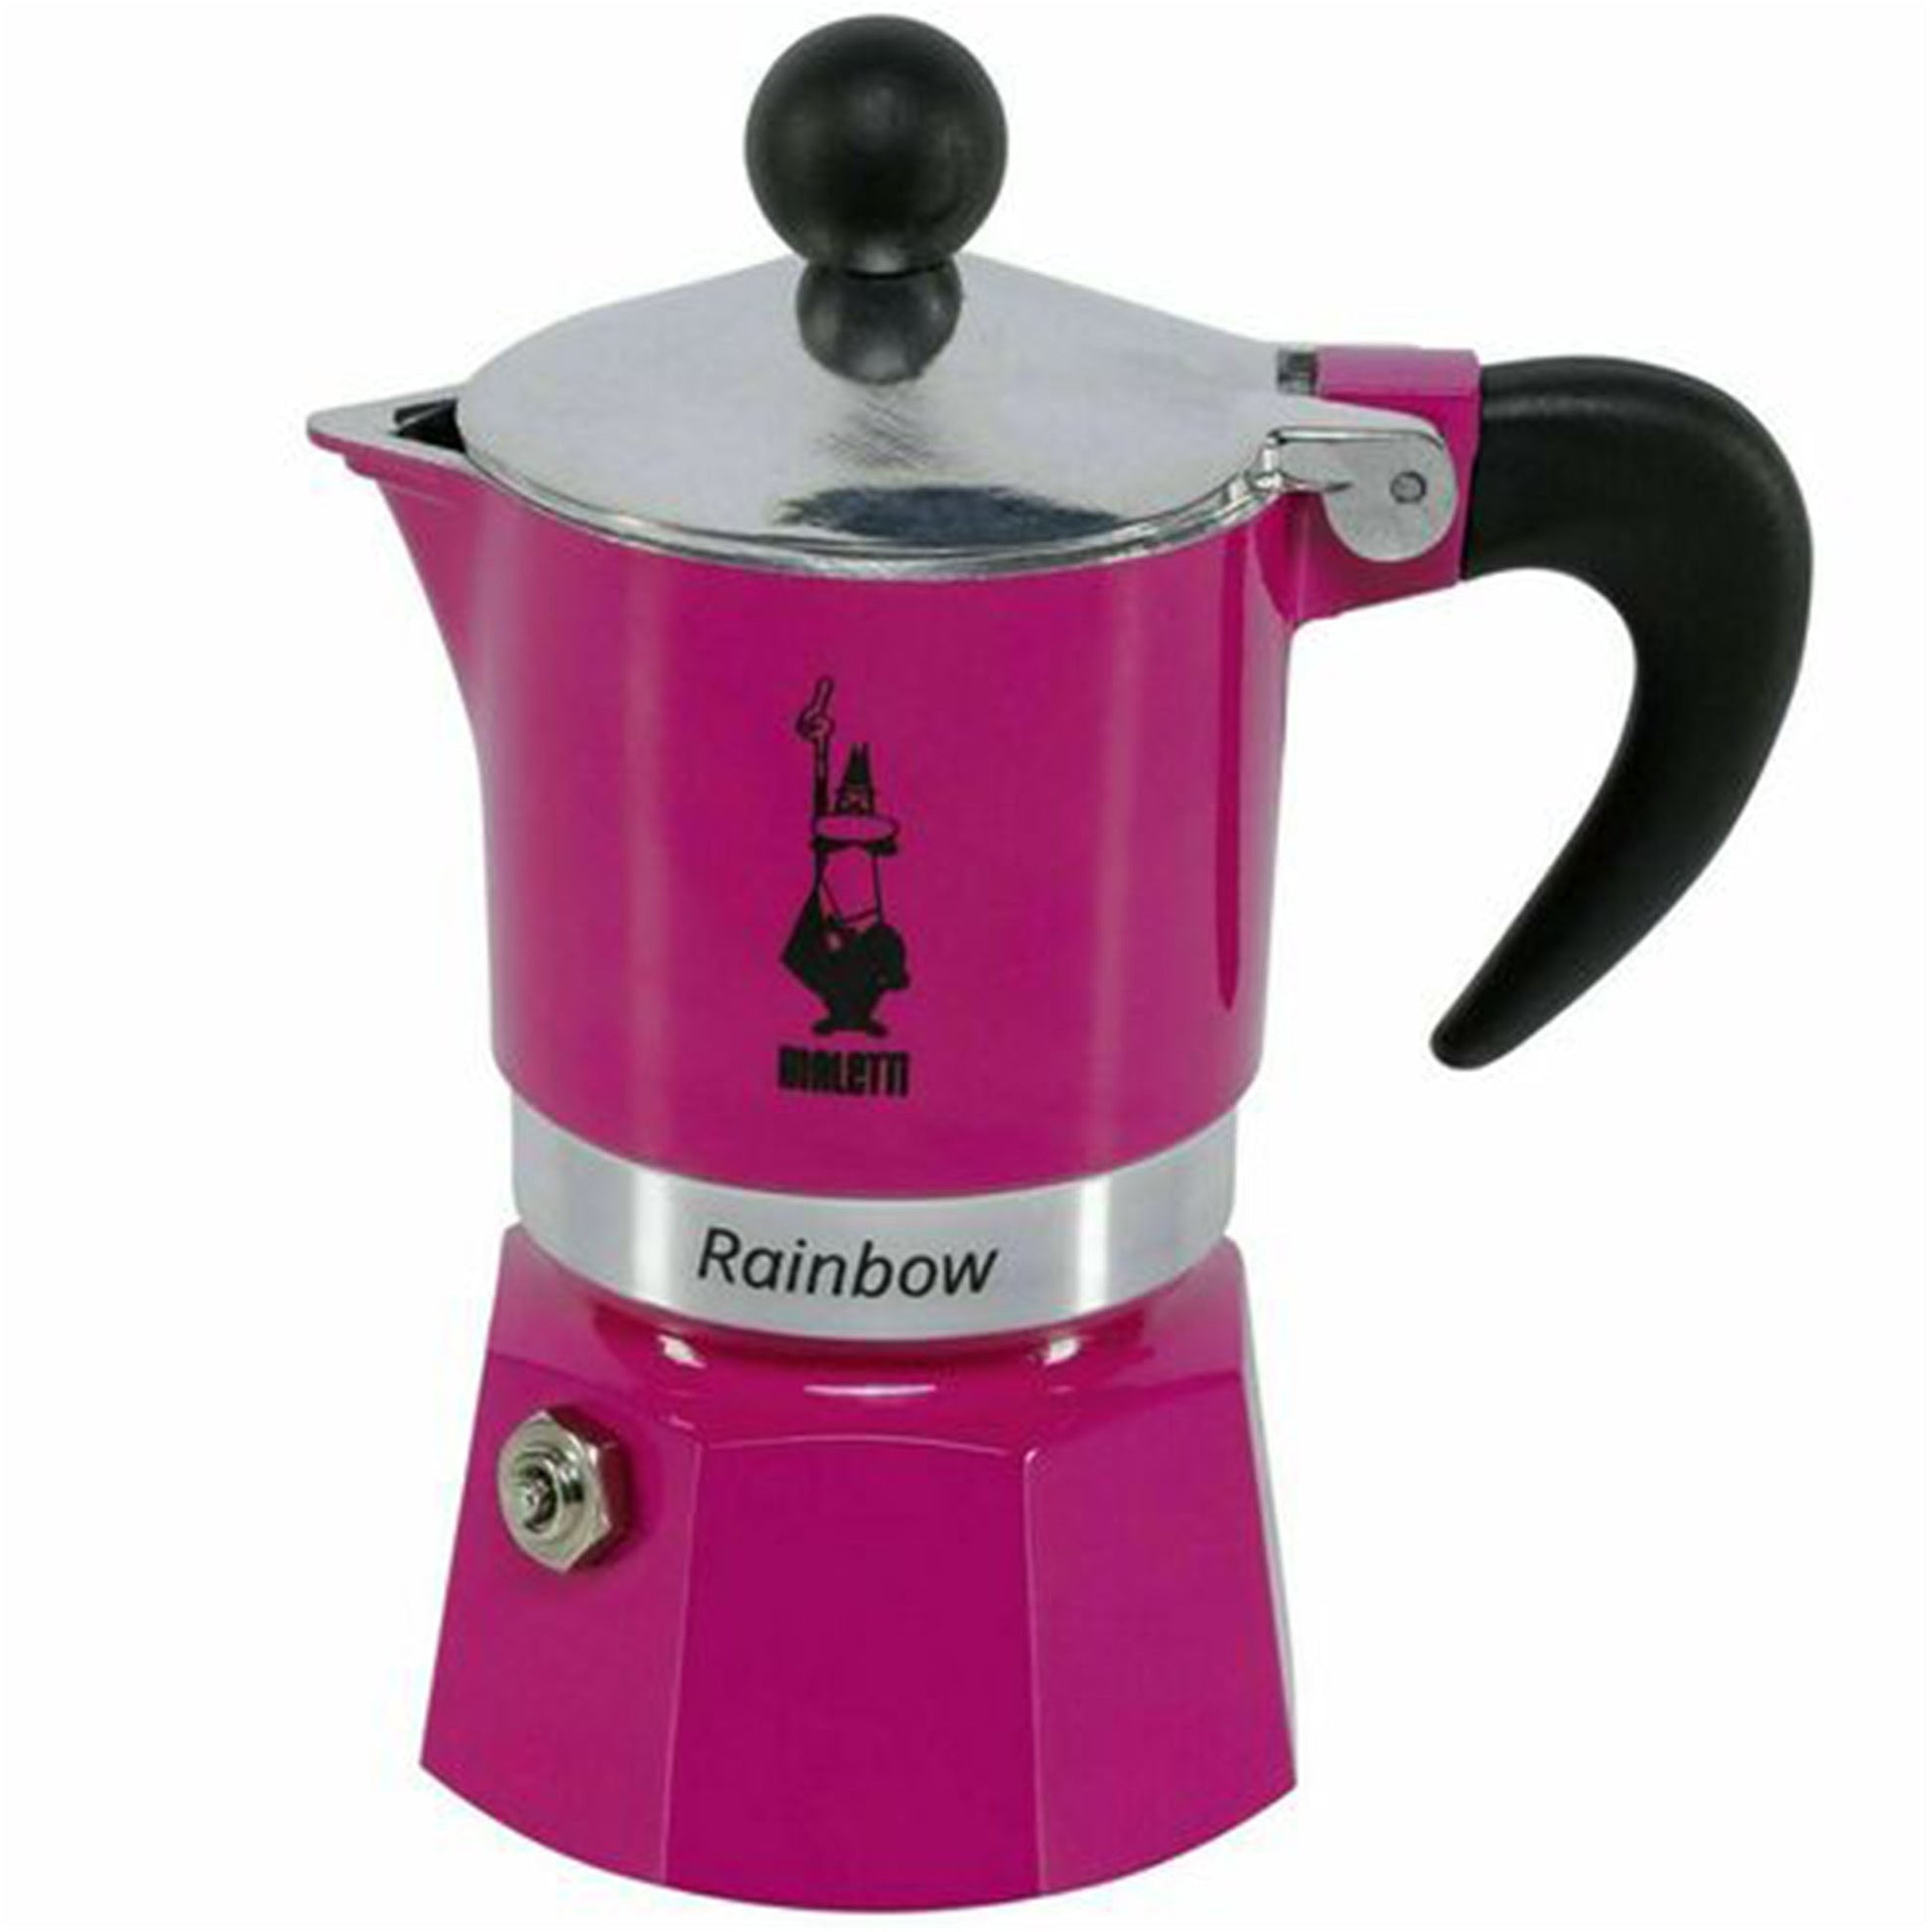 Bialetti Rainbow Pink 1 Cup